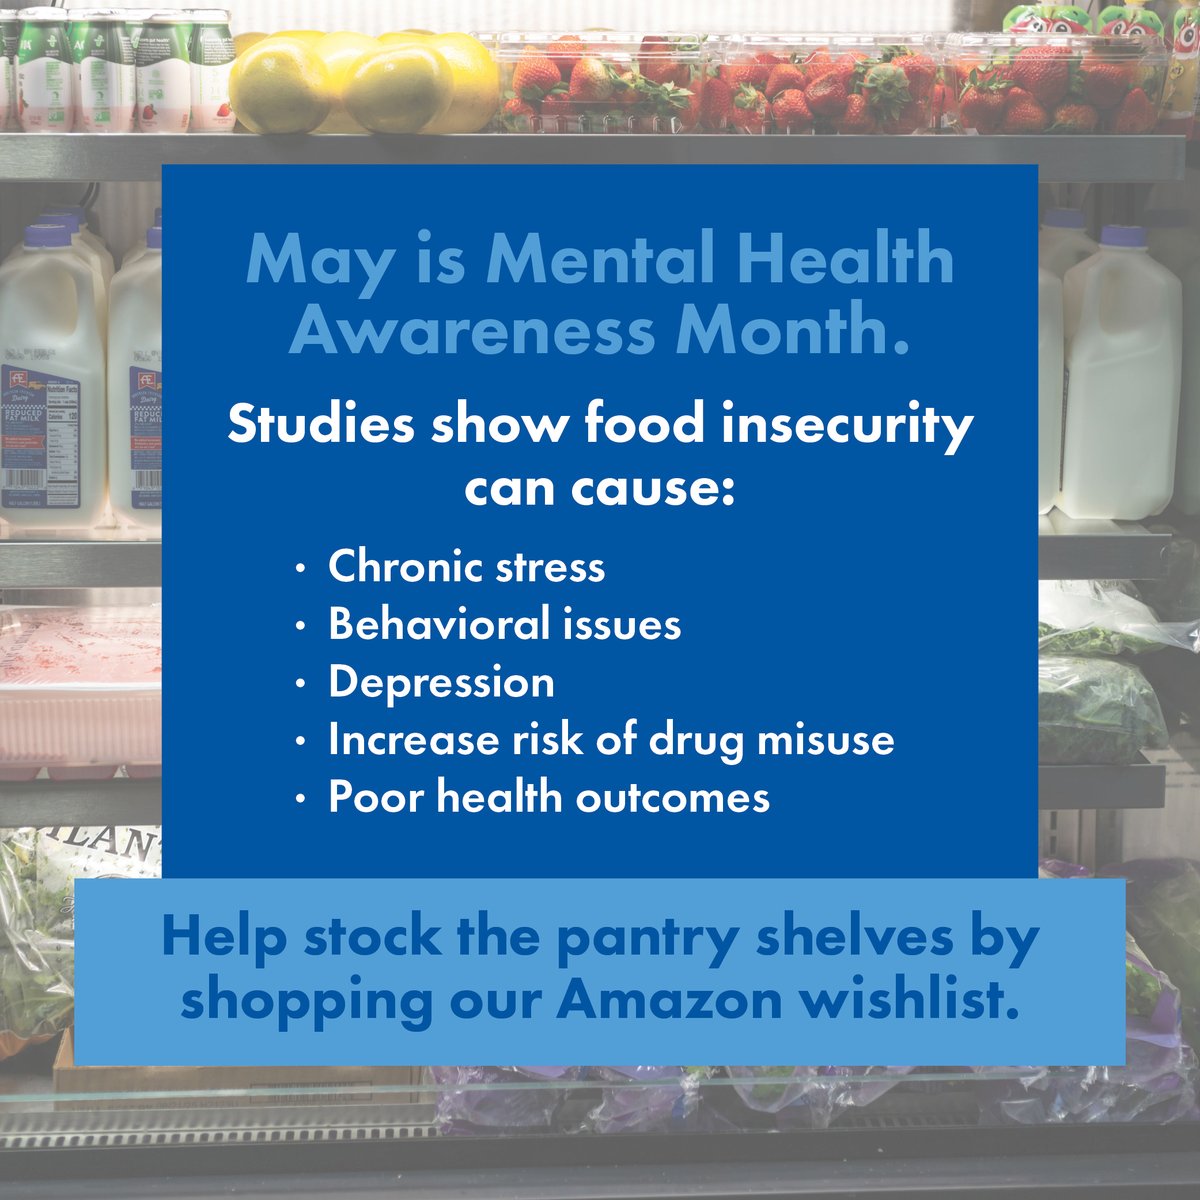 May is #MentalHealthAwarenessMonth, and the connection between food insecurity & mental health struggles is sobering. Help us fight hunger in our community by stocking the shelves at our two food pantries: a.co/cjYl0dq Thank you for your support!